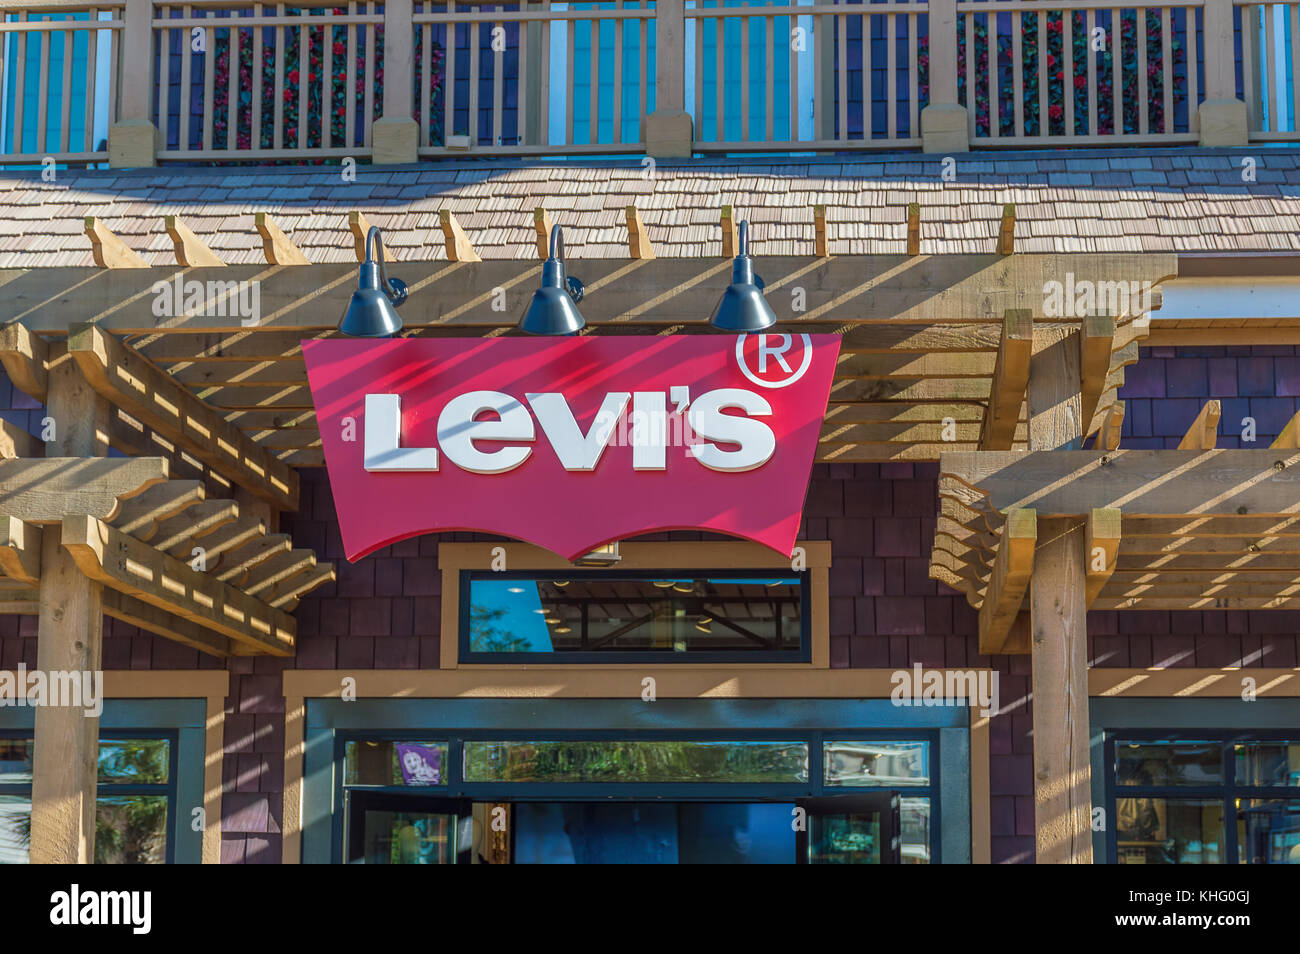 Levis Trademark High Resolution Stock Photography and Images - Alamy